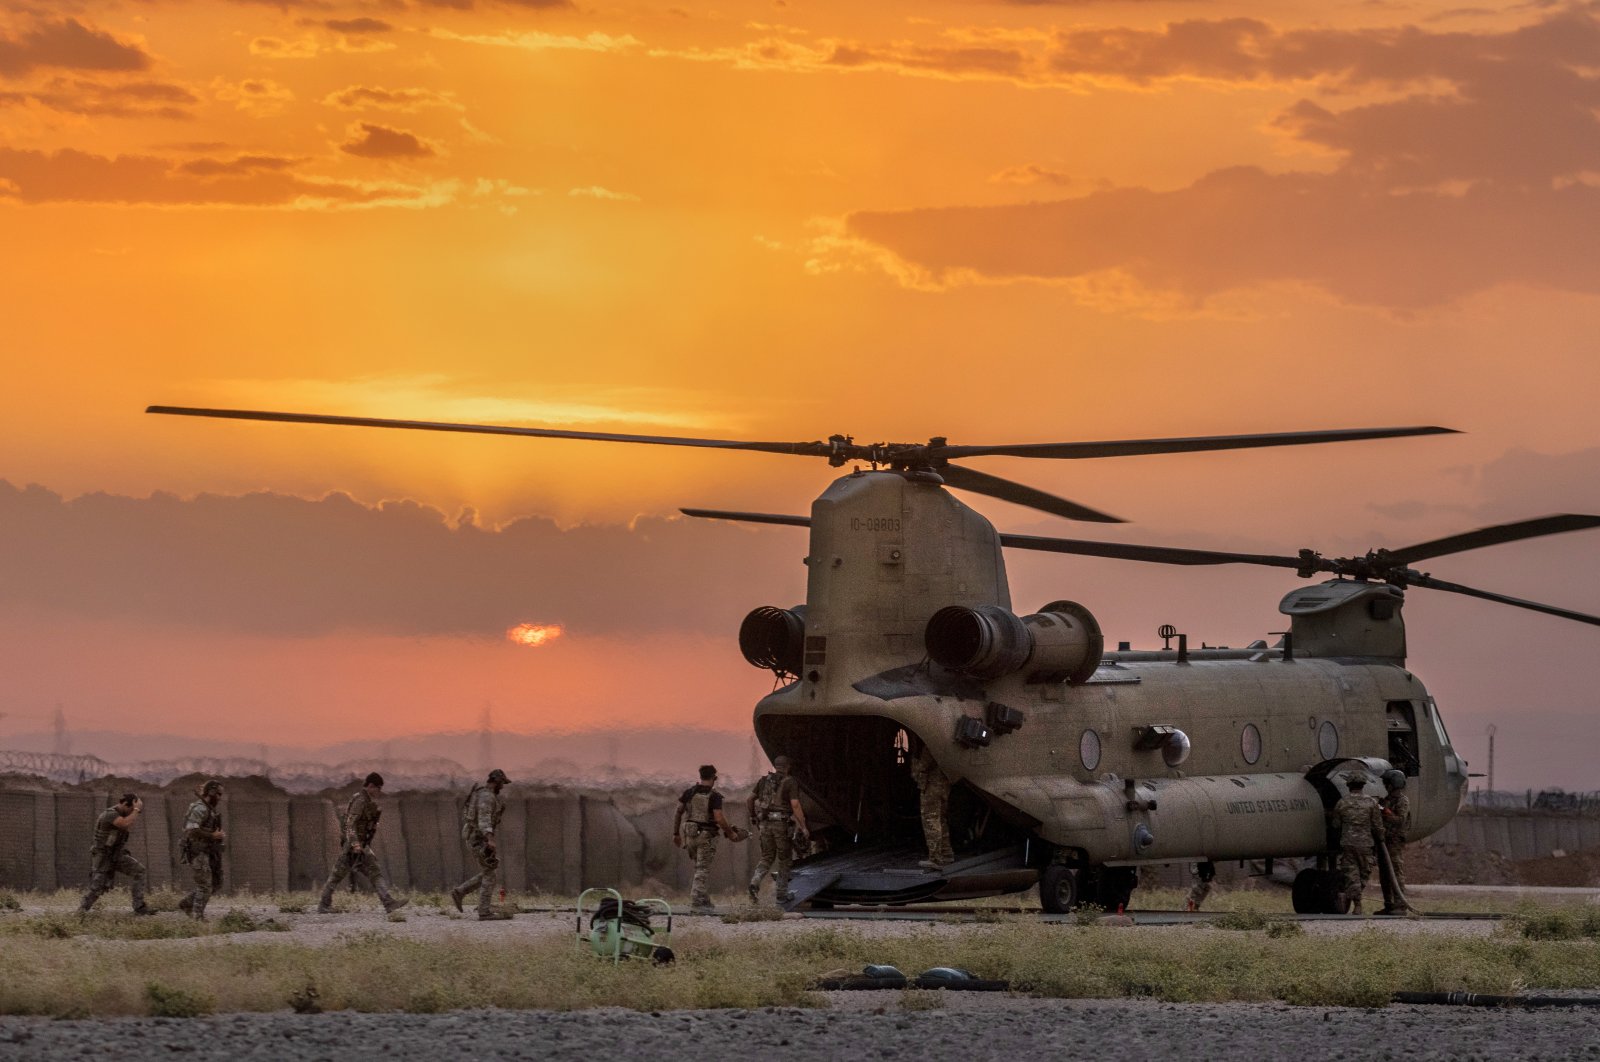 U.S. Army soldiers board a CH-47 Chinook helicopter while departing a remote combat outpost known as RLZ  near the Turkish border in northeastern Syria, May 25, 2021. (Getty Images)